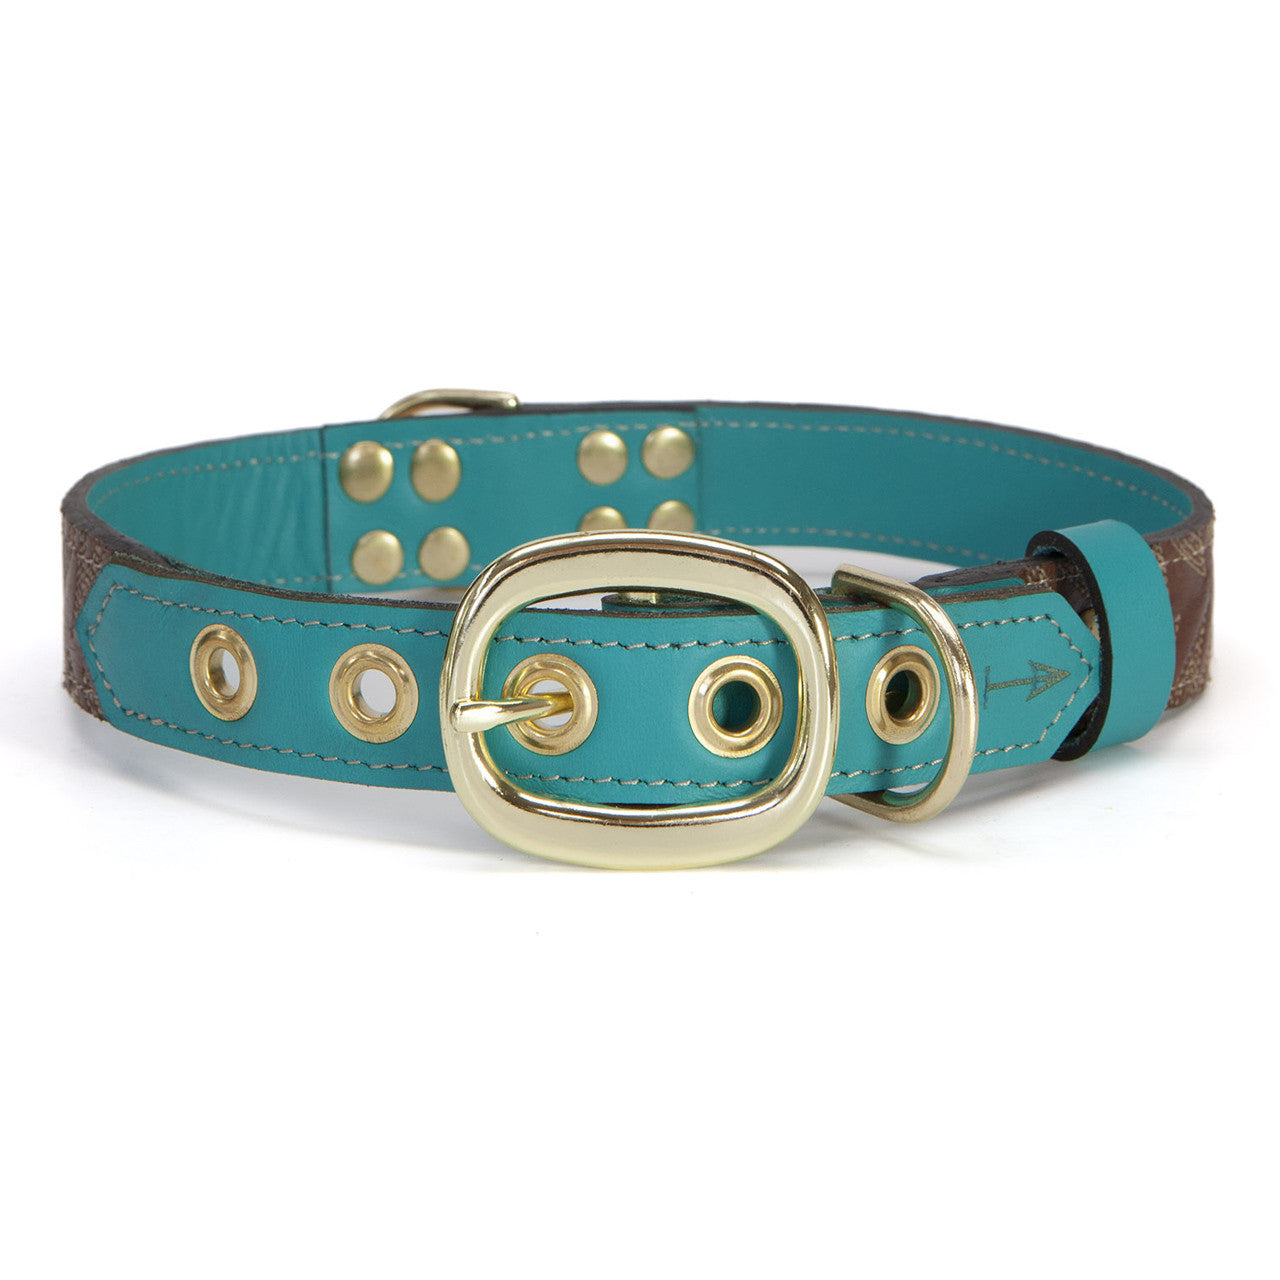 Turquoise Dog Collar with Dark Brown Leather + White Stitching (back view)